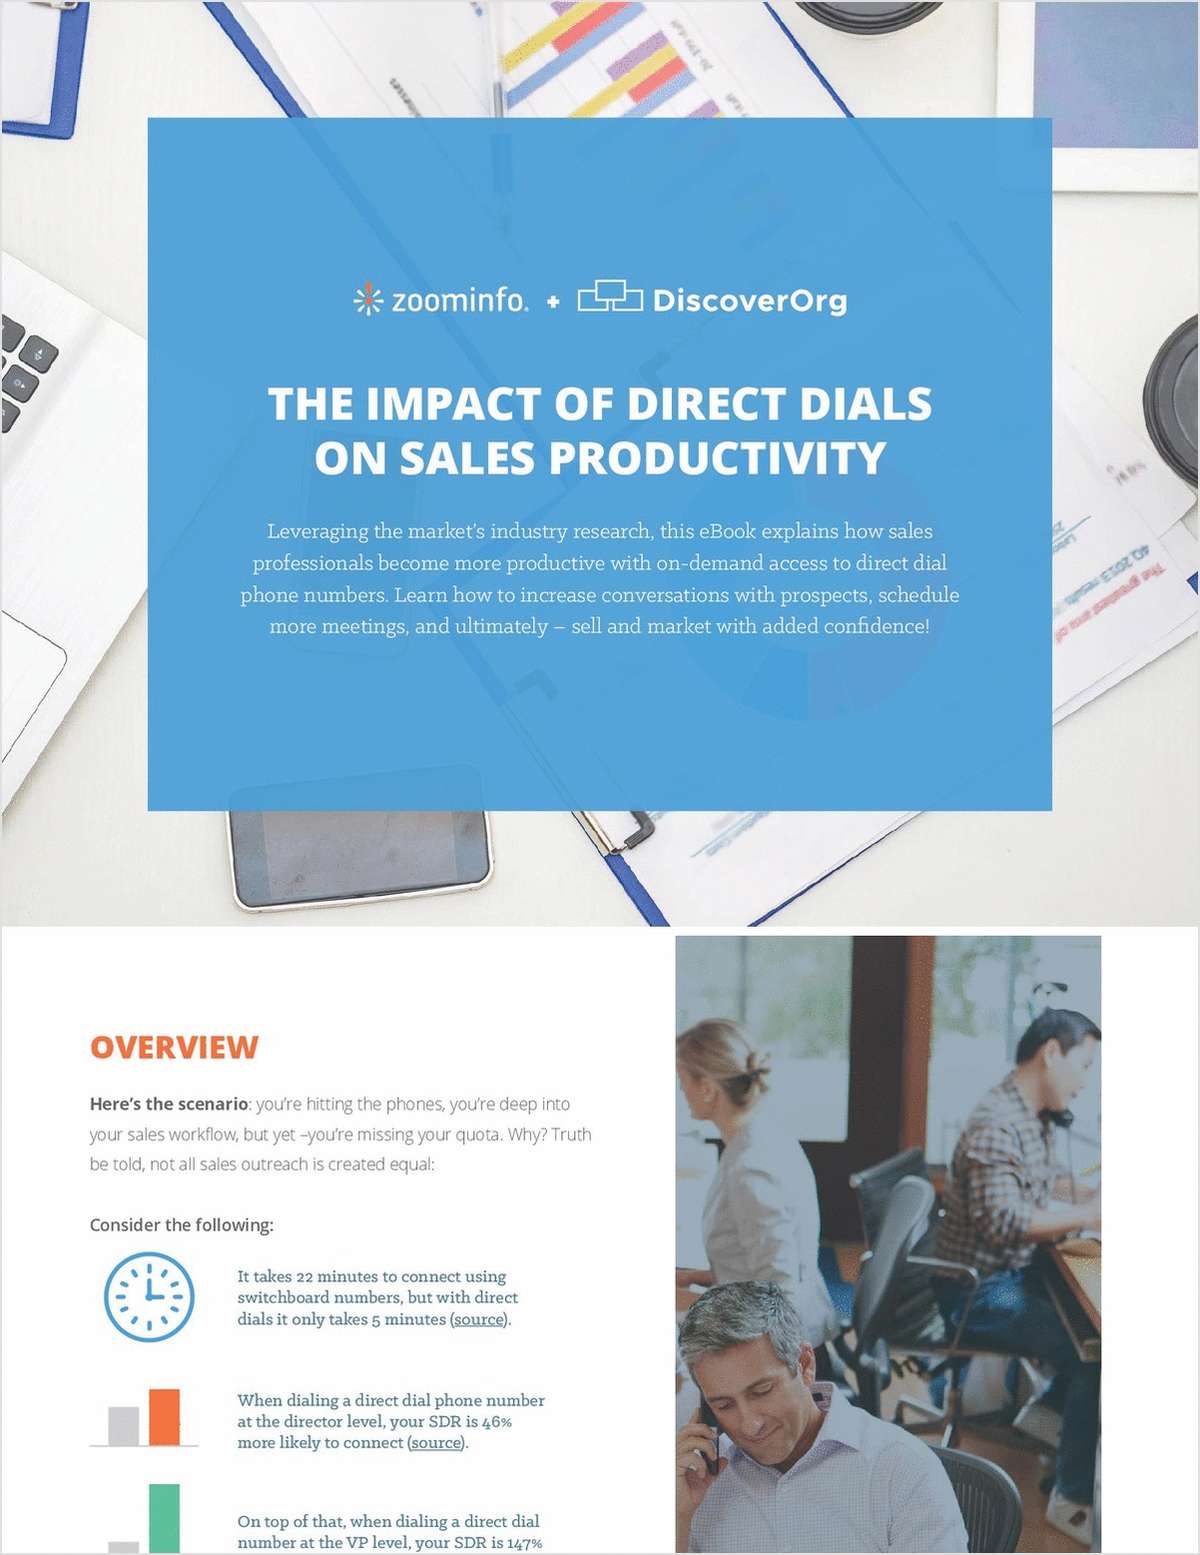 The Impact of Direct Dials on Sales Productivity